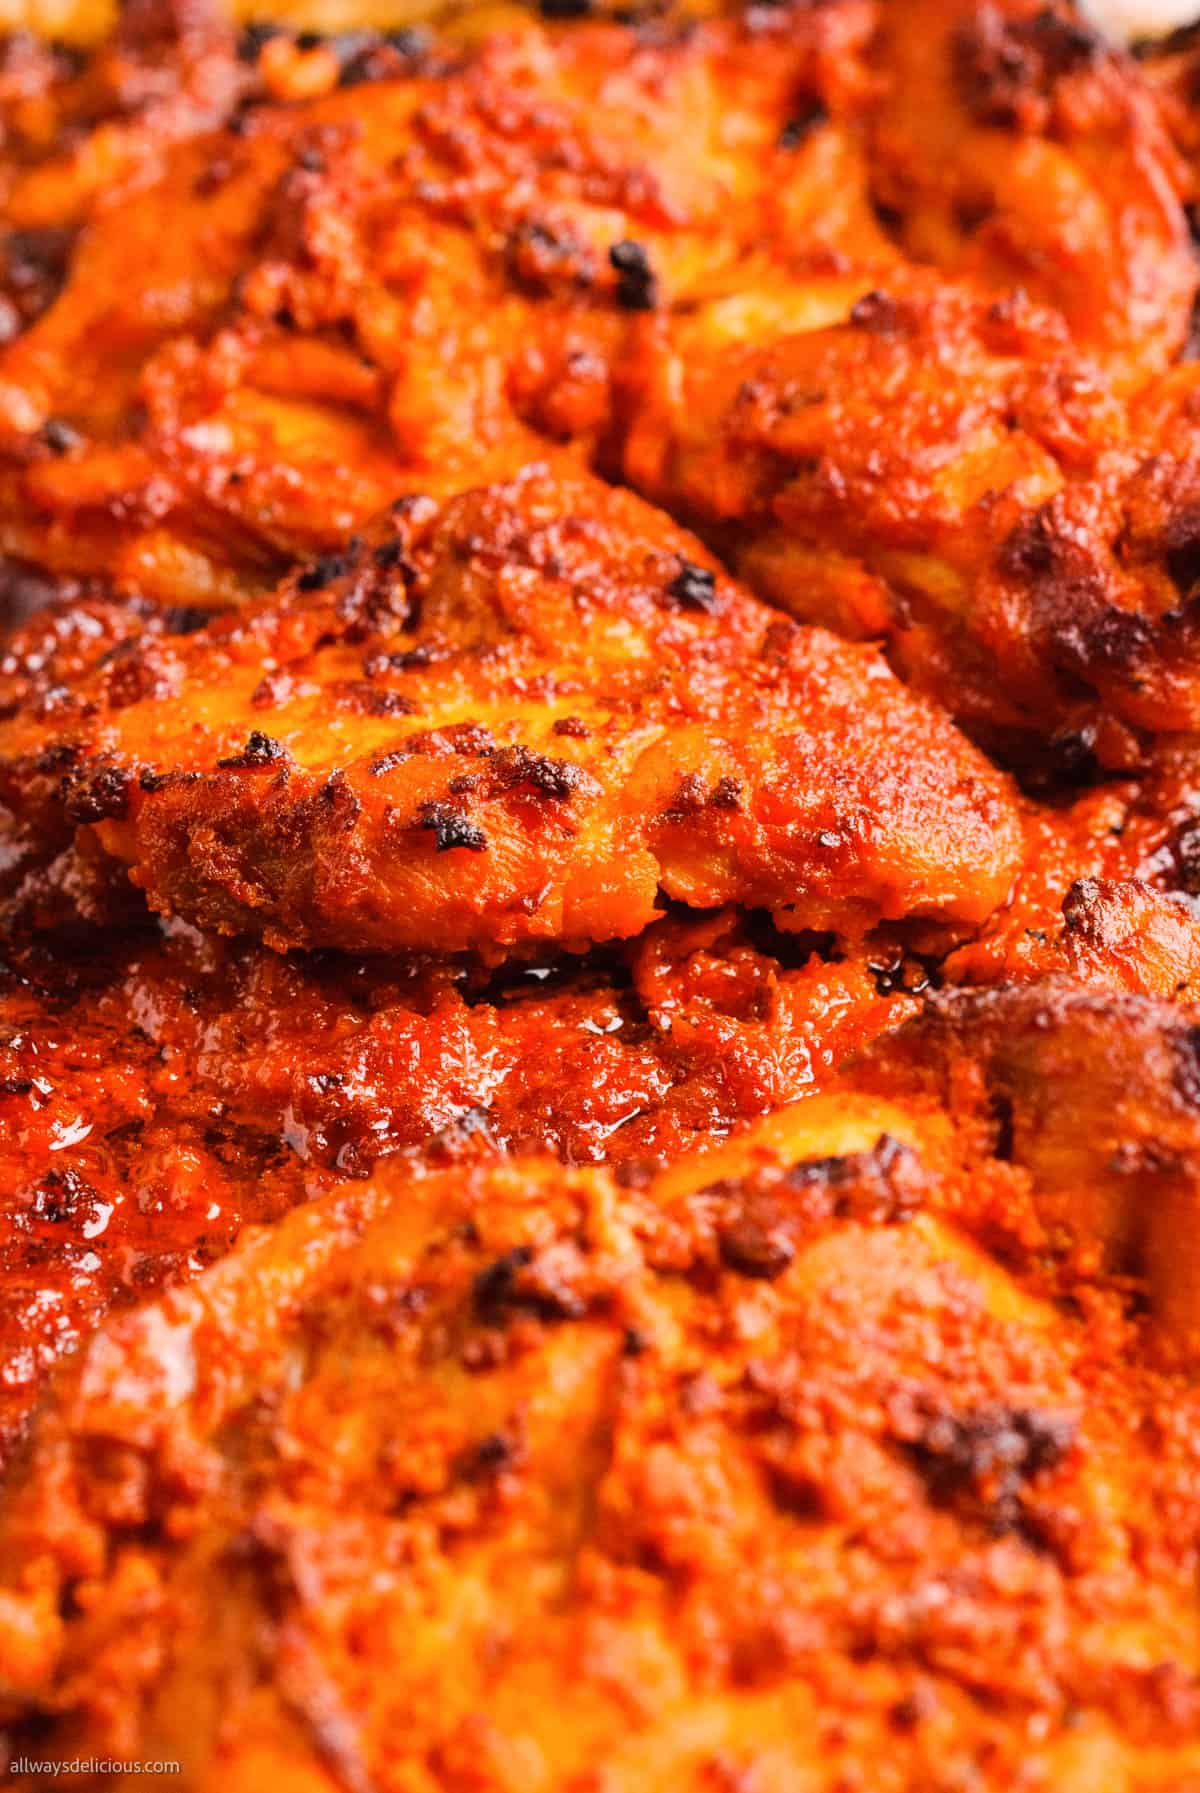 A close up of a harissa chicken dish in a red sauce.